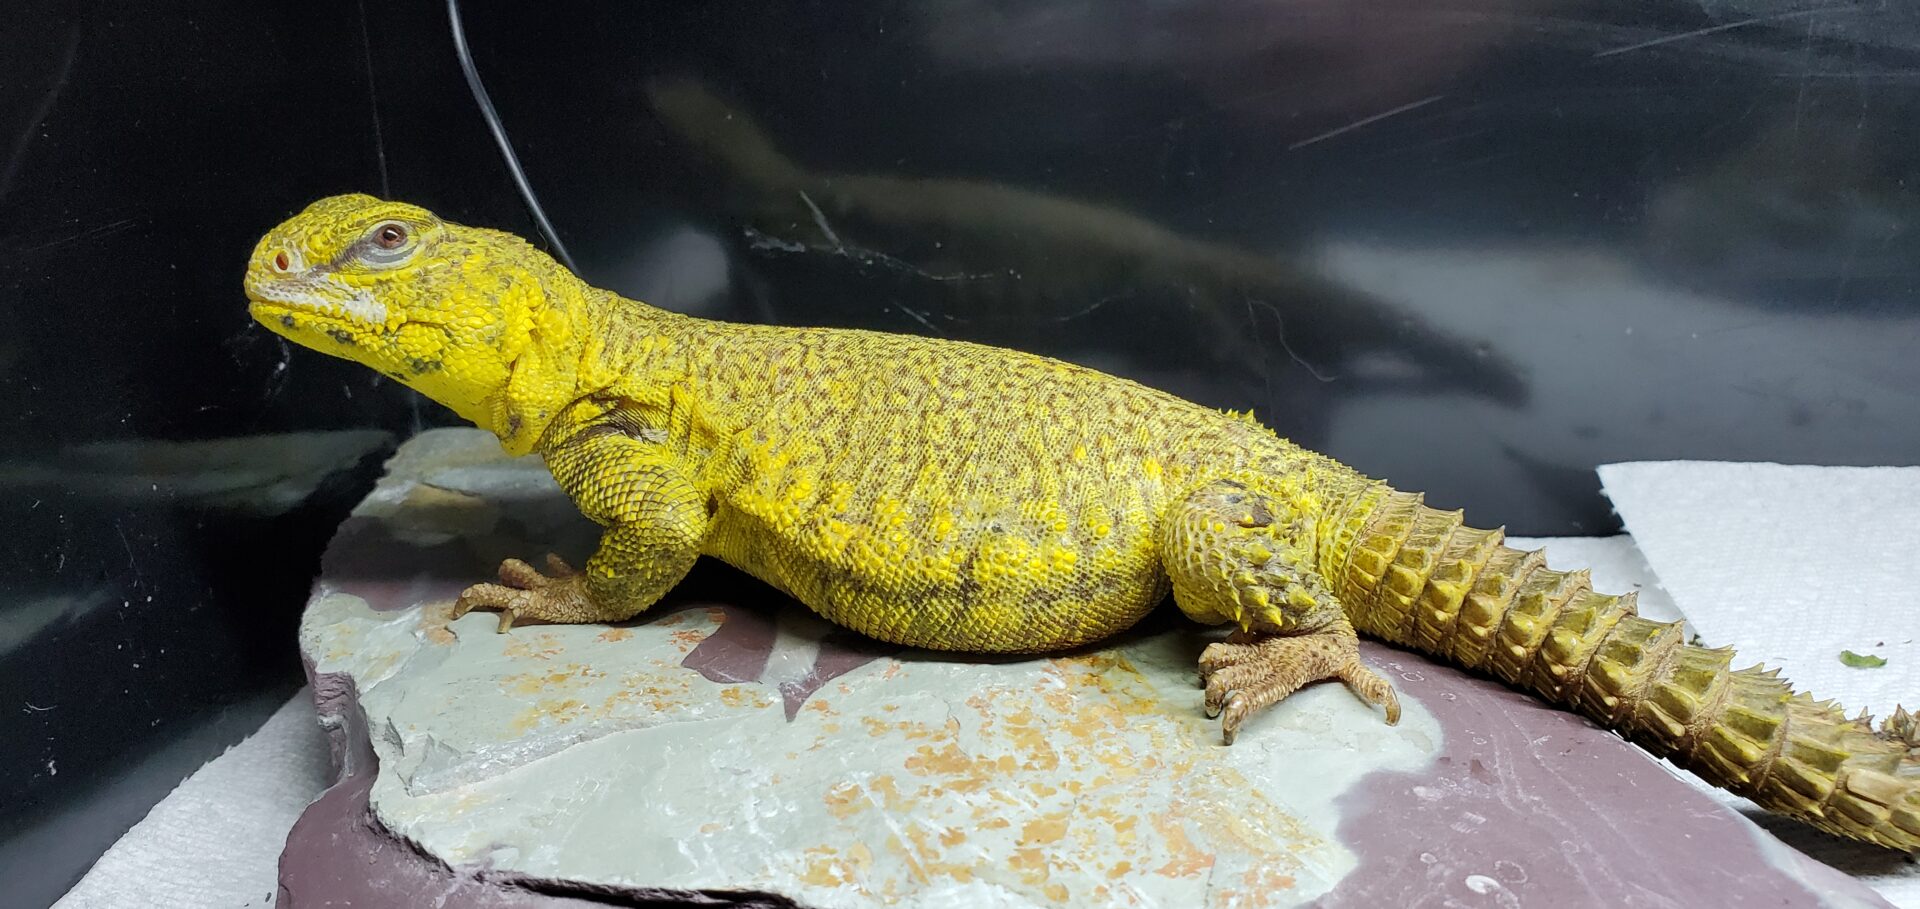 A yellow lizard is sitting on some paper